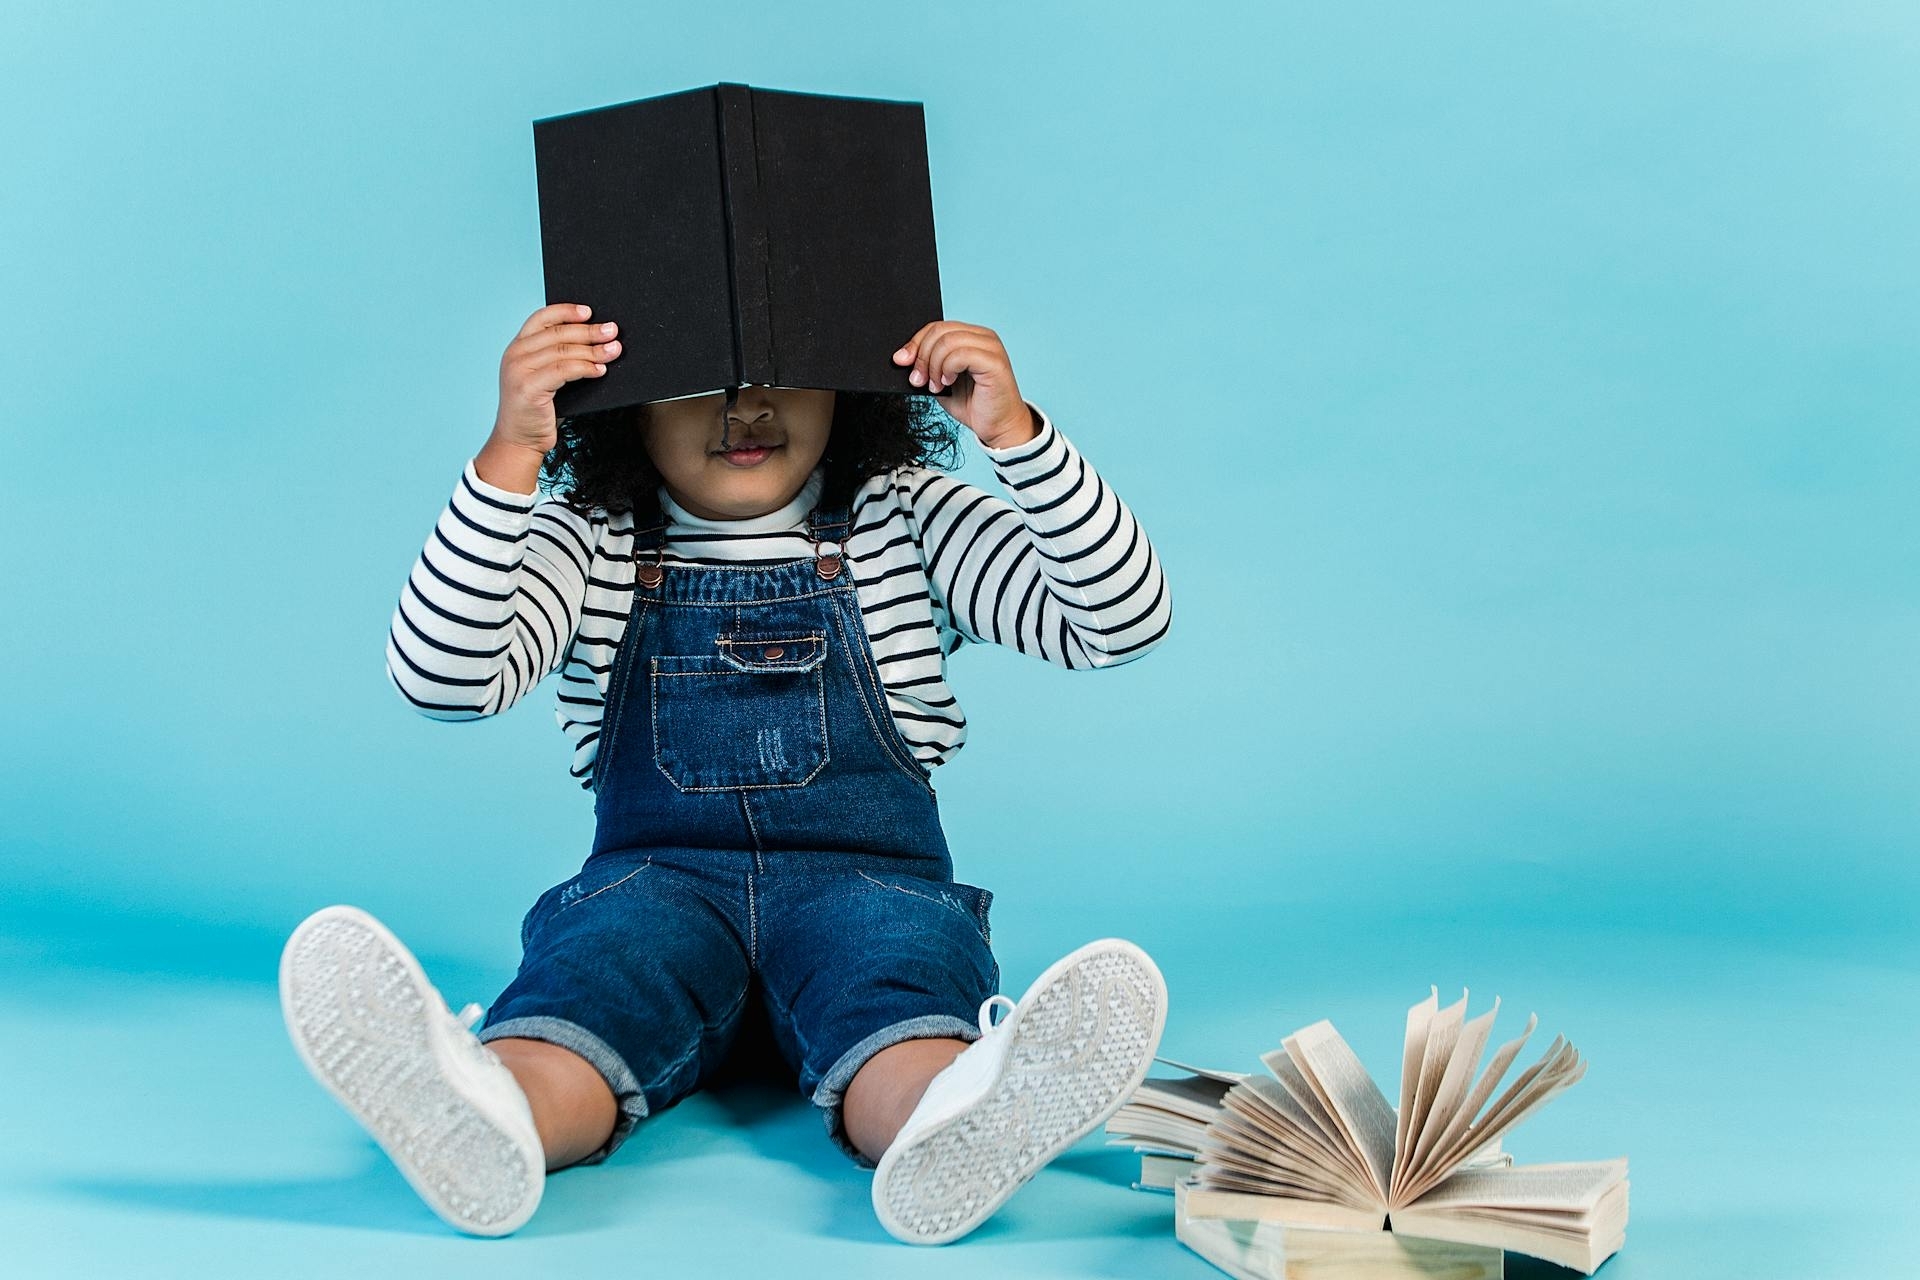 20 Children’s Books about Shyness and Finding Your Voice